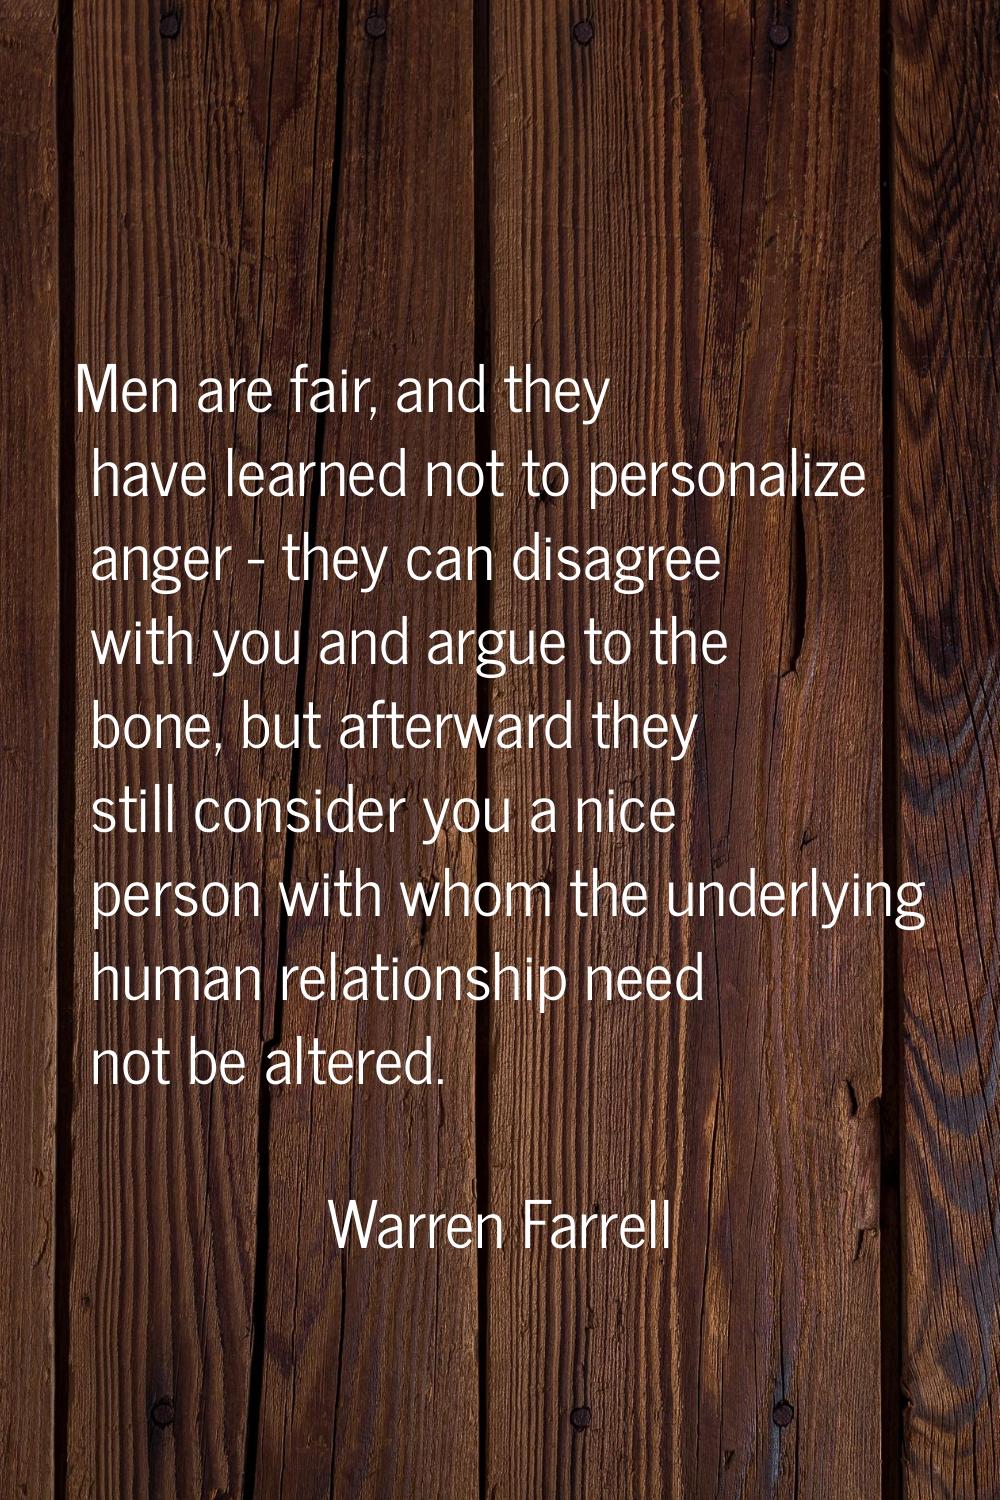 Men are fair, and they have learned not to personalize anger - they can disagree with you and argue